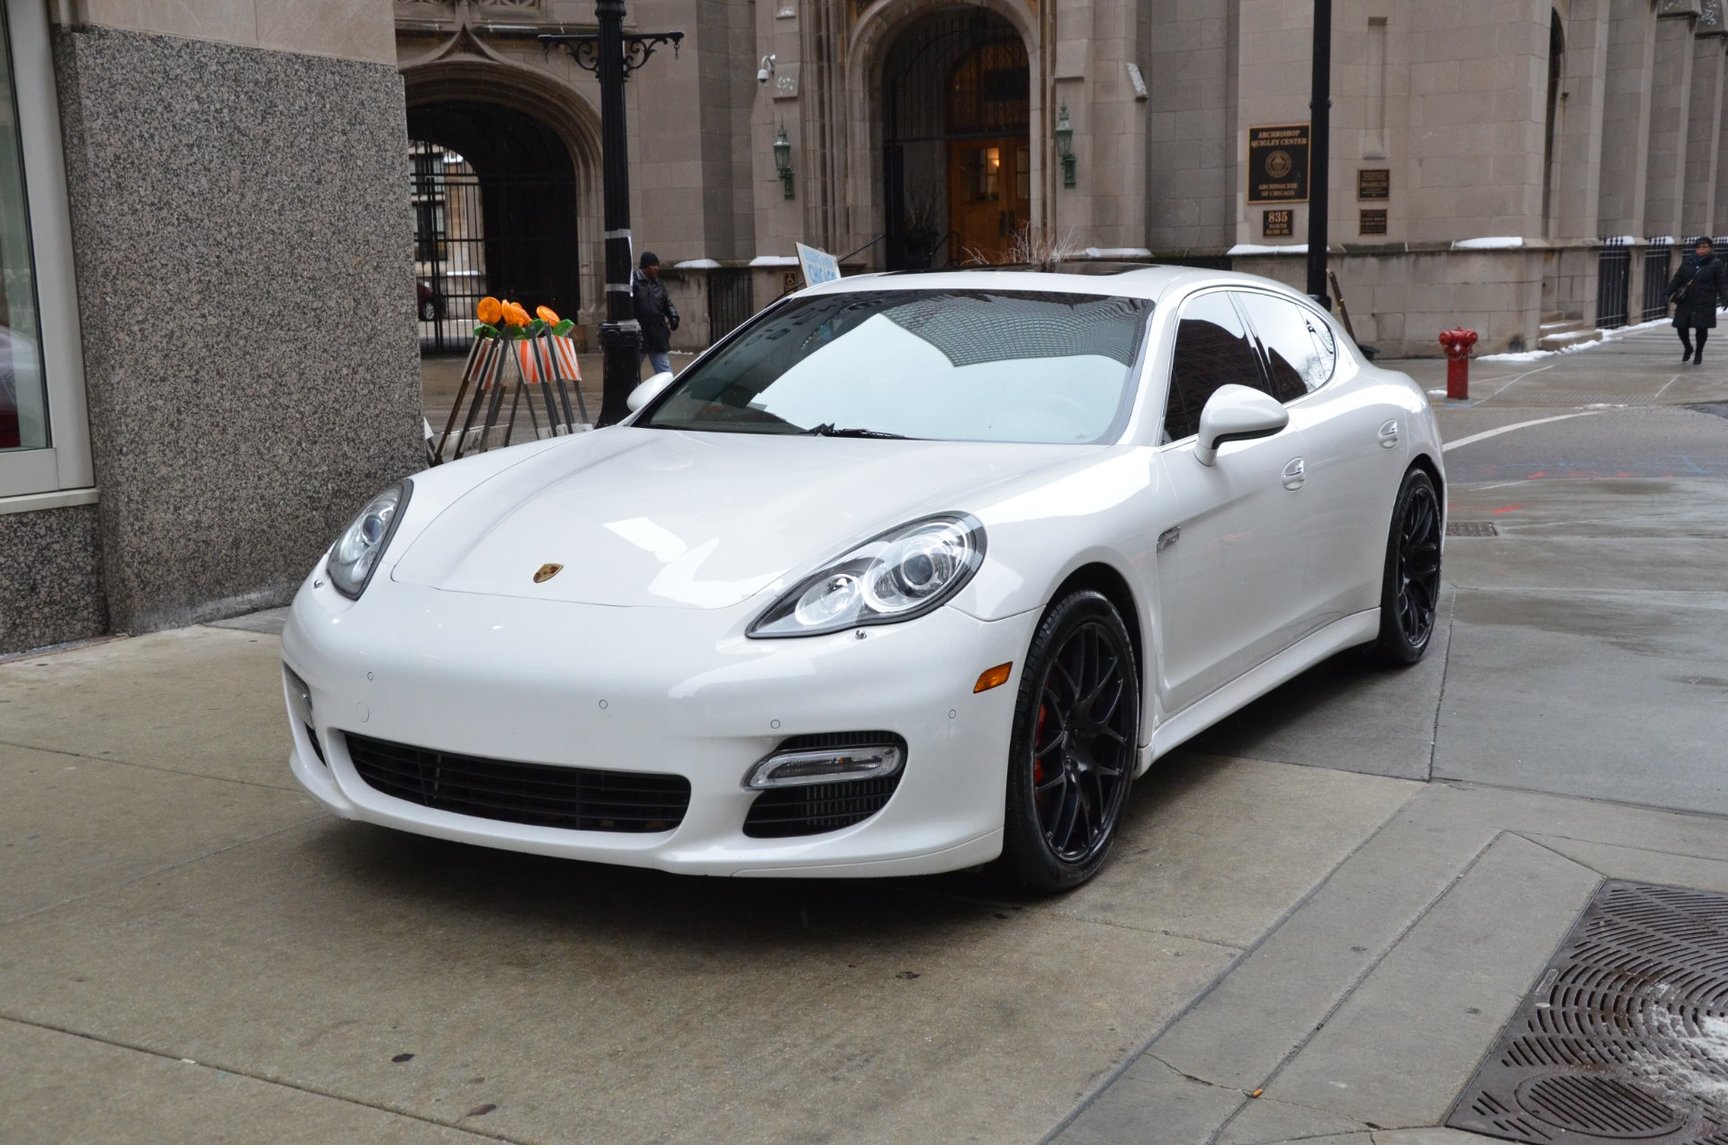 Porsche Panamera Hire Manchester Supercars of Yorkshire